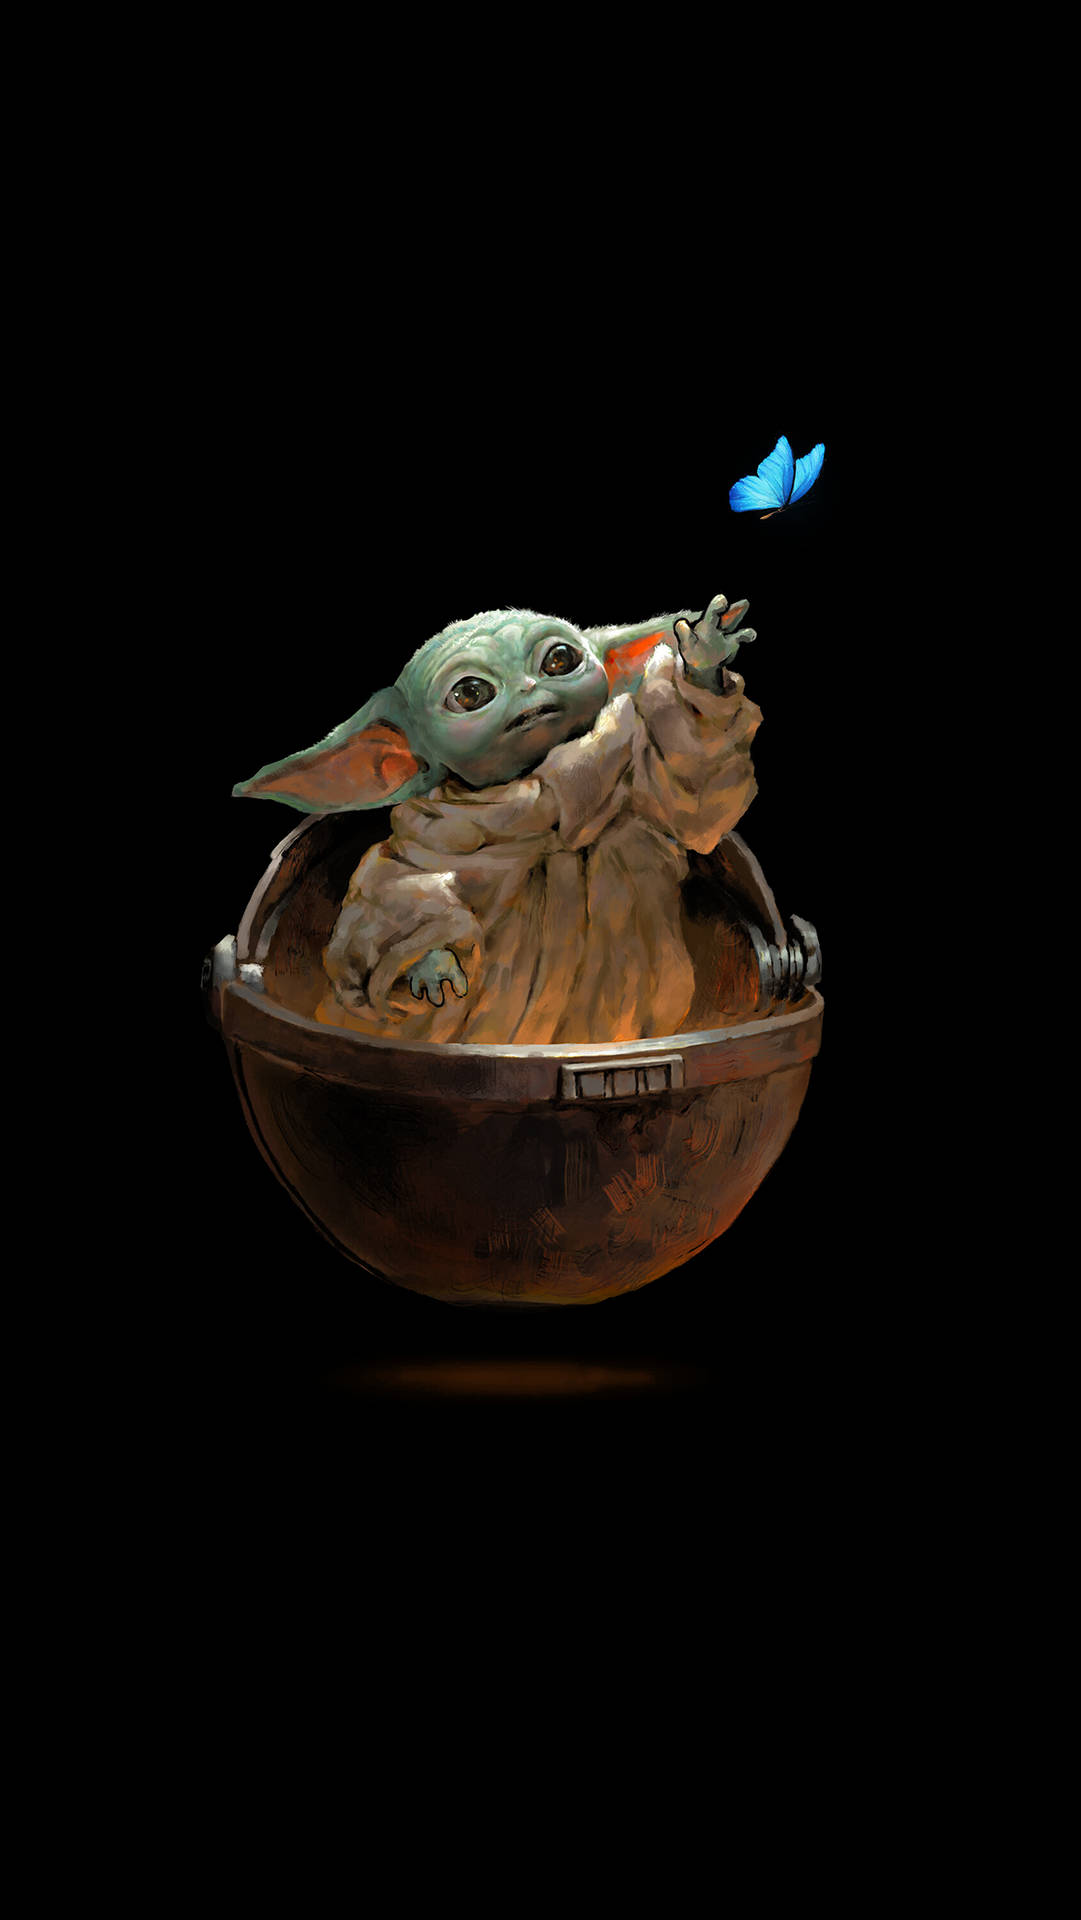 Yoda In Bowl-shaped Space Craft Background